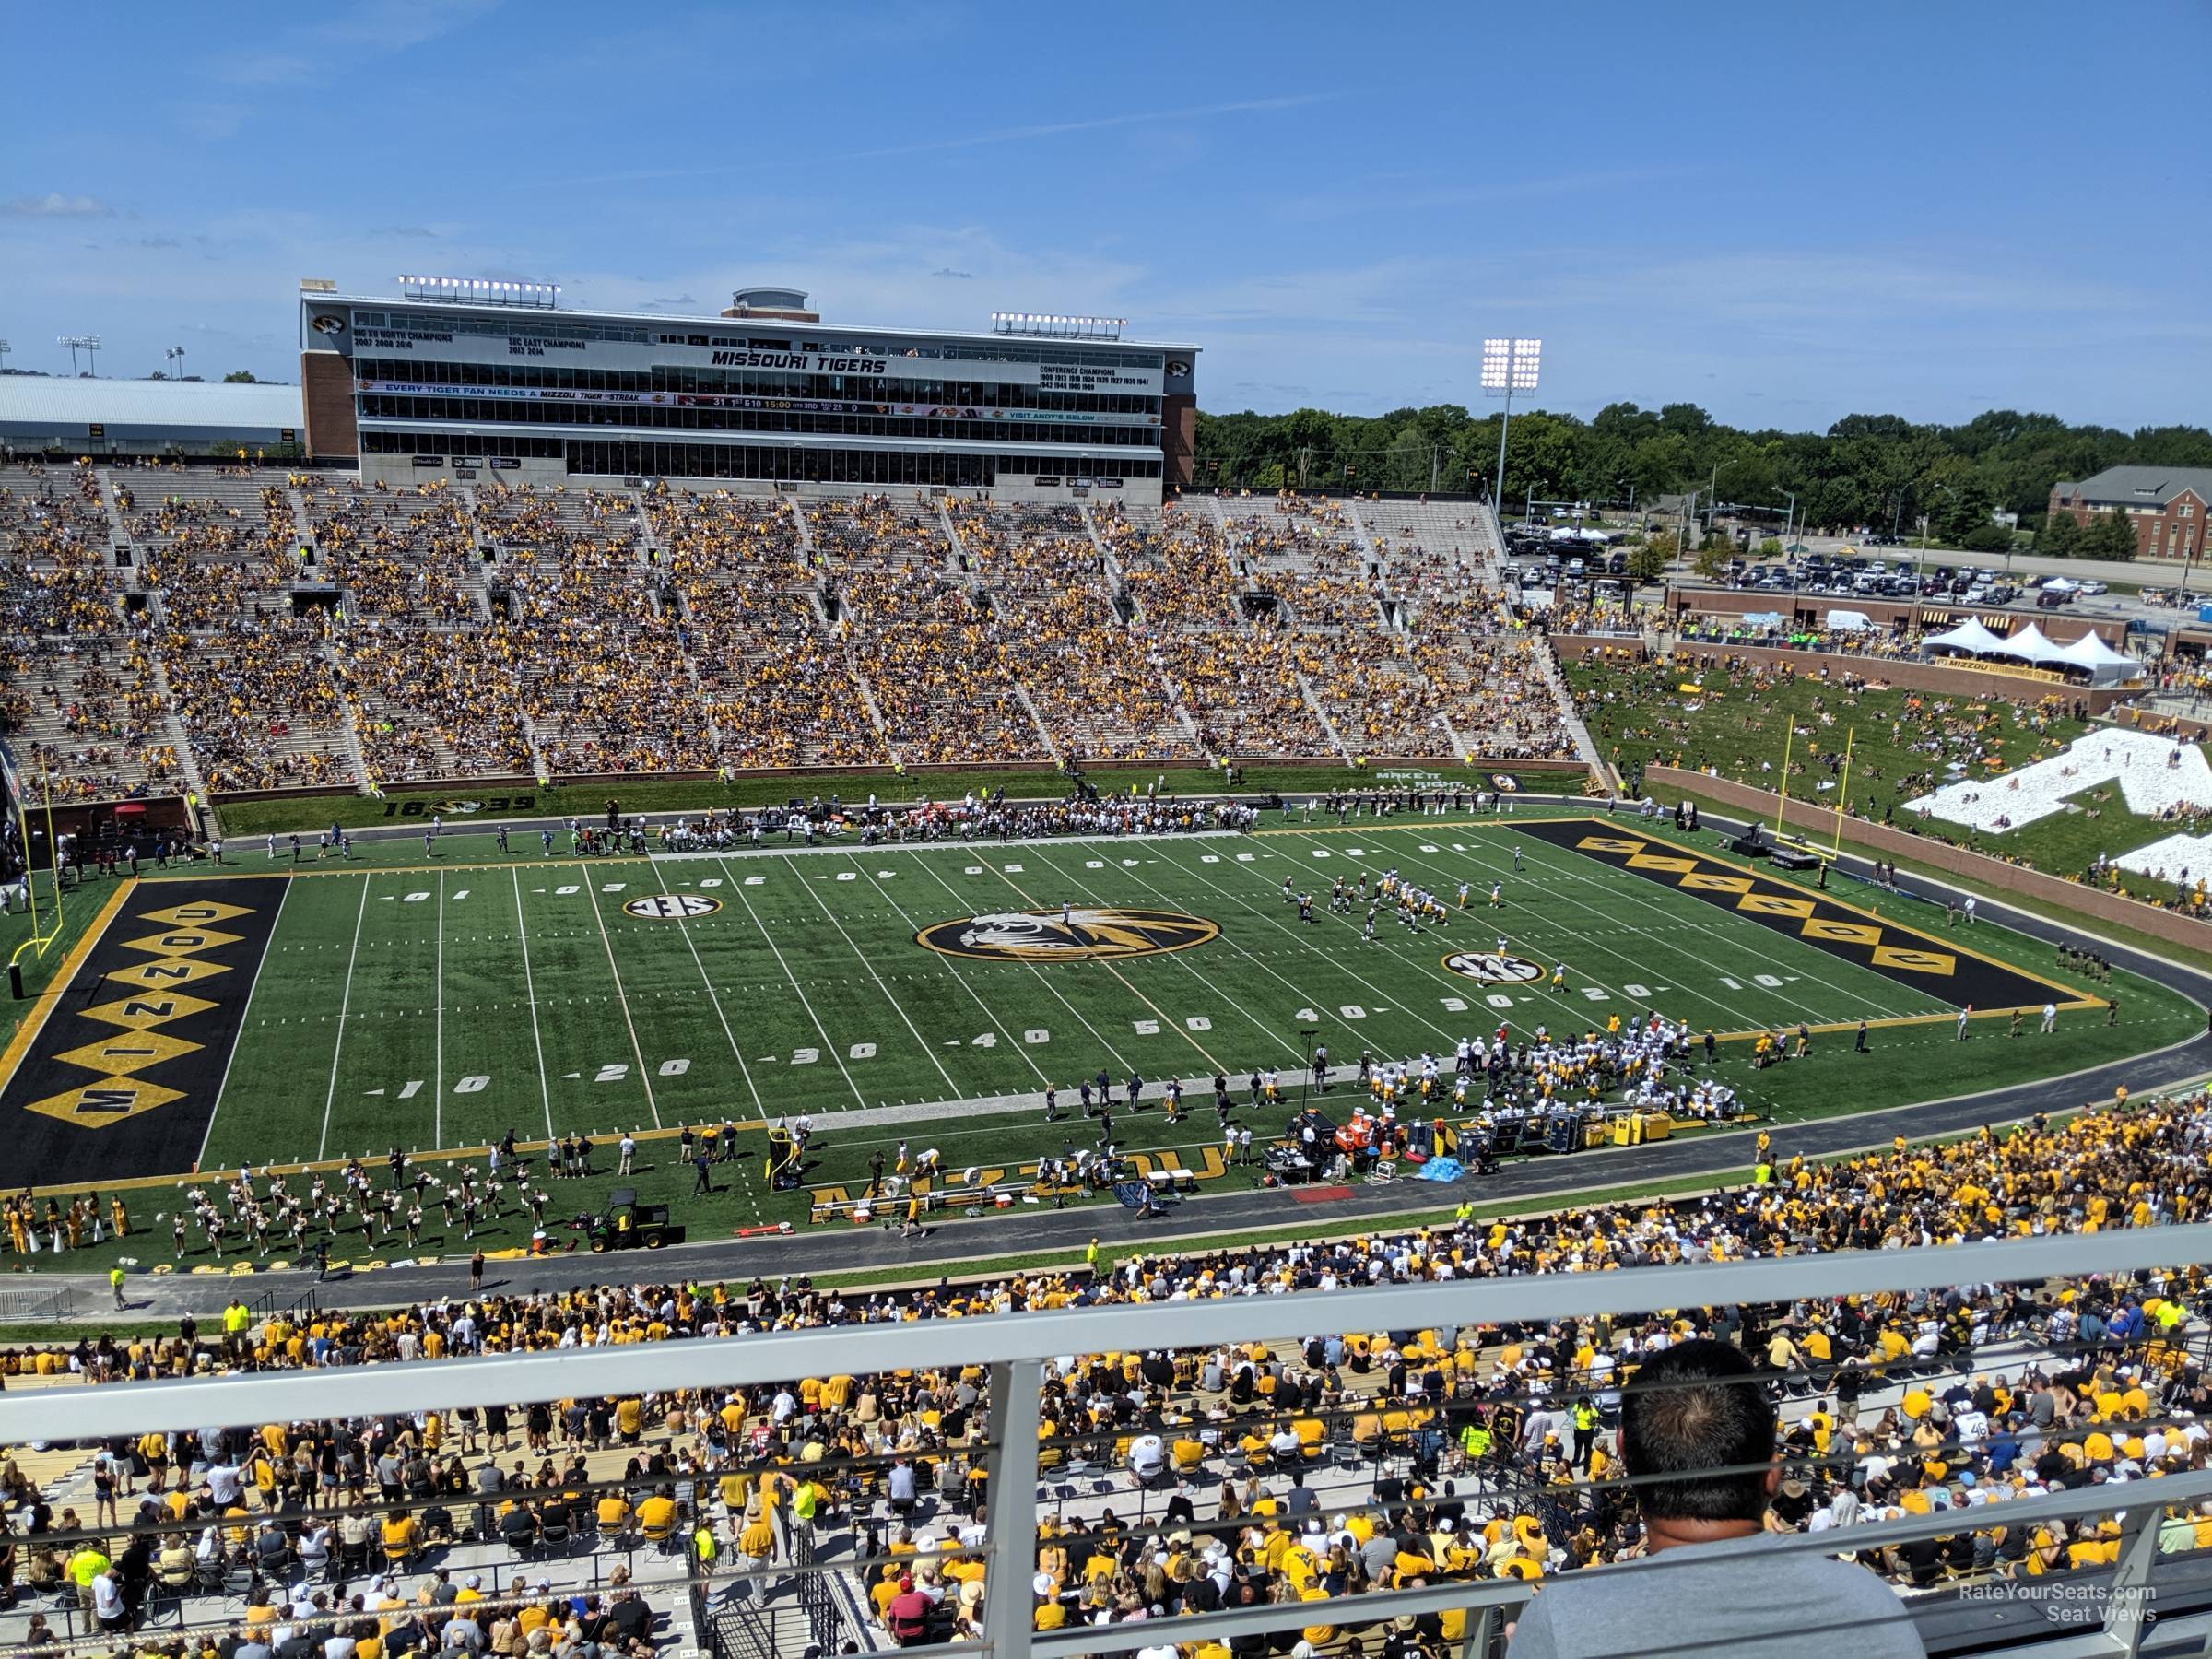 section 305, row 4 seat view  - faurot field